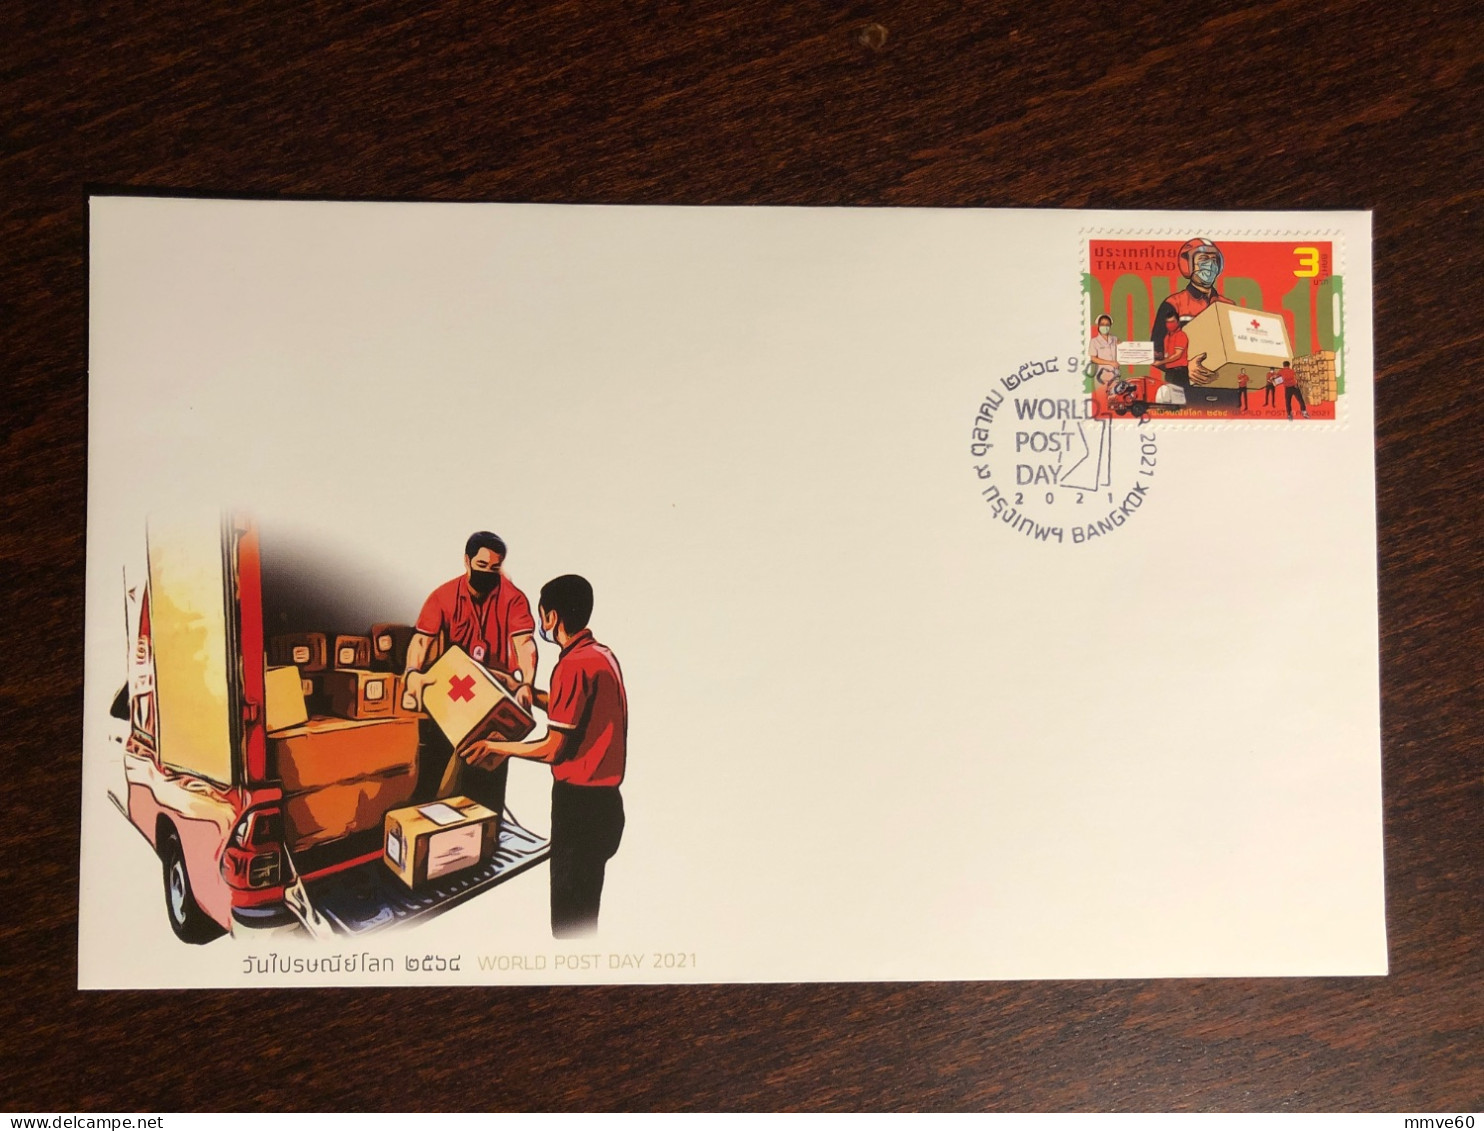 THAILAND FDC COVER 2021 YEAR COVID RED CROSS HEALTH MEDICINE STAMPS - Thailand